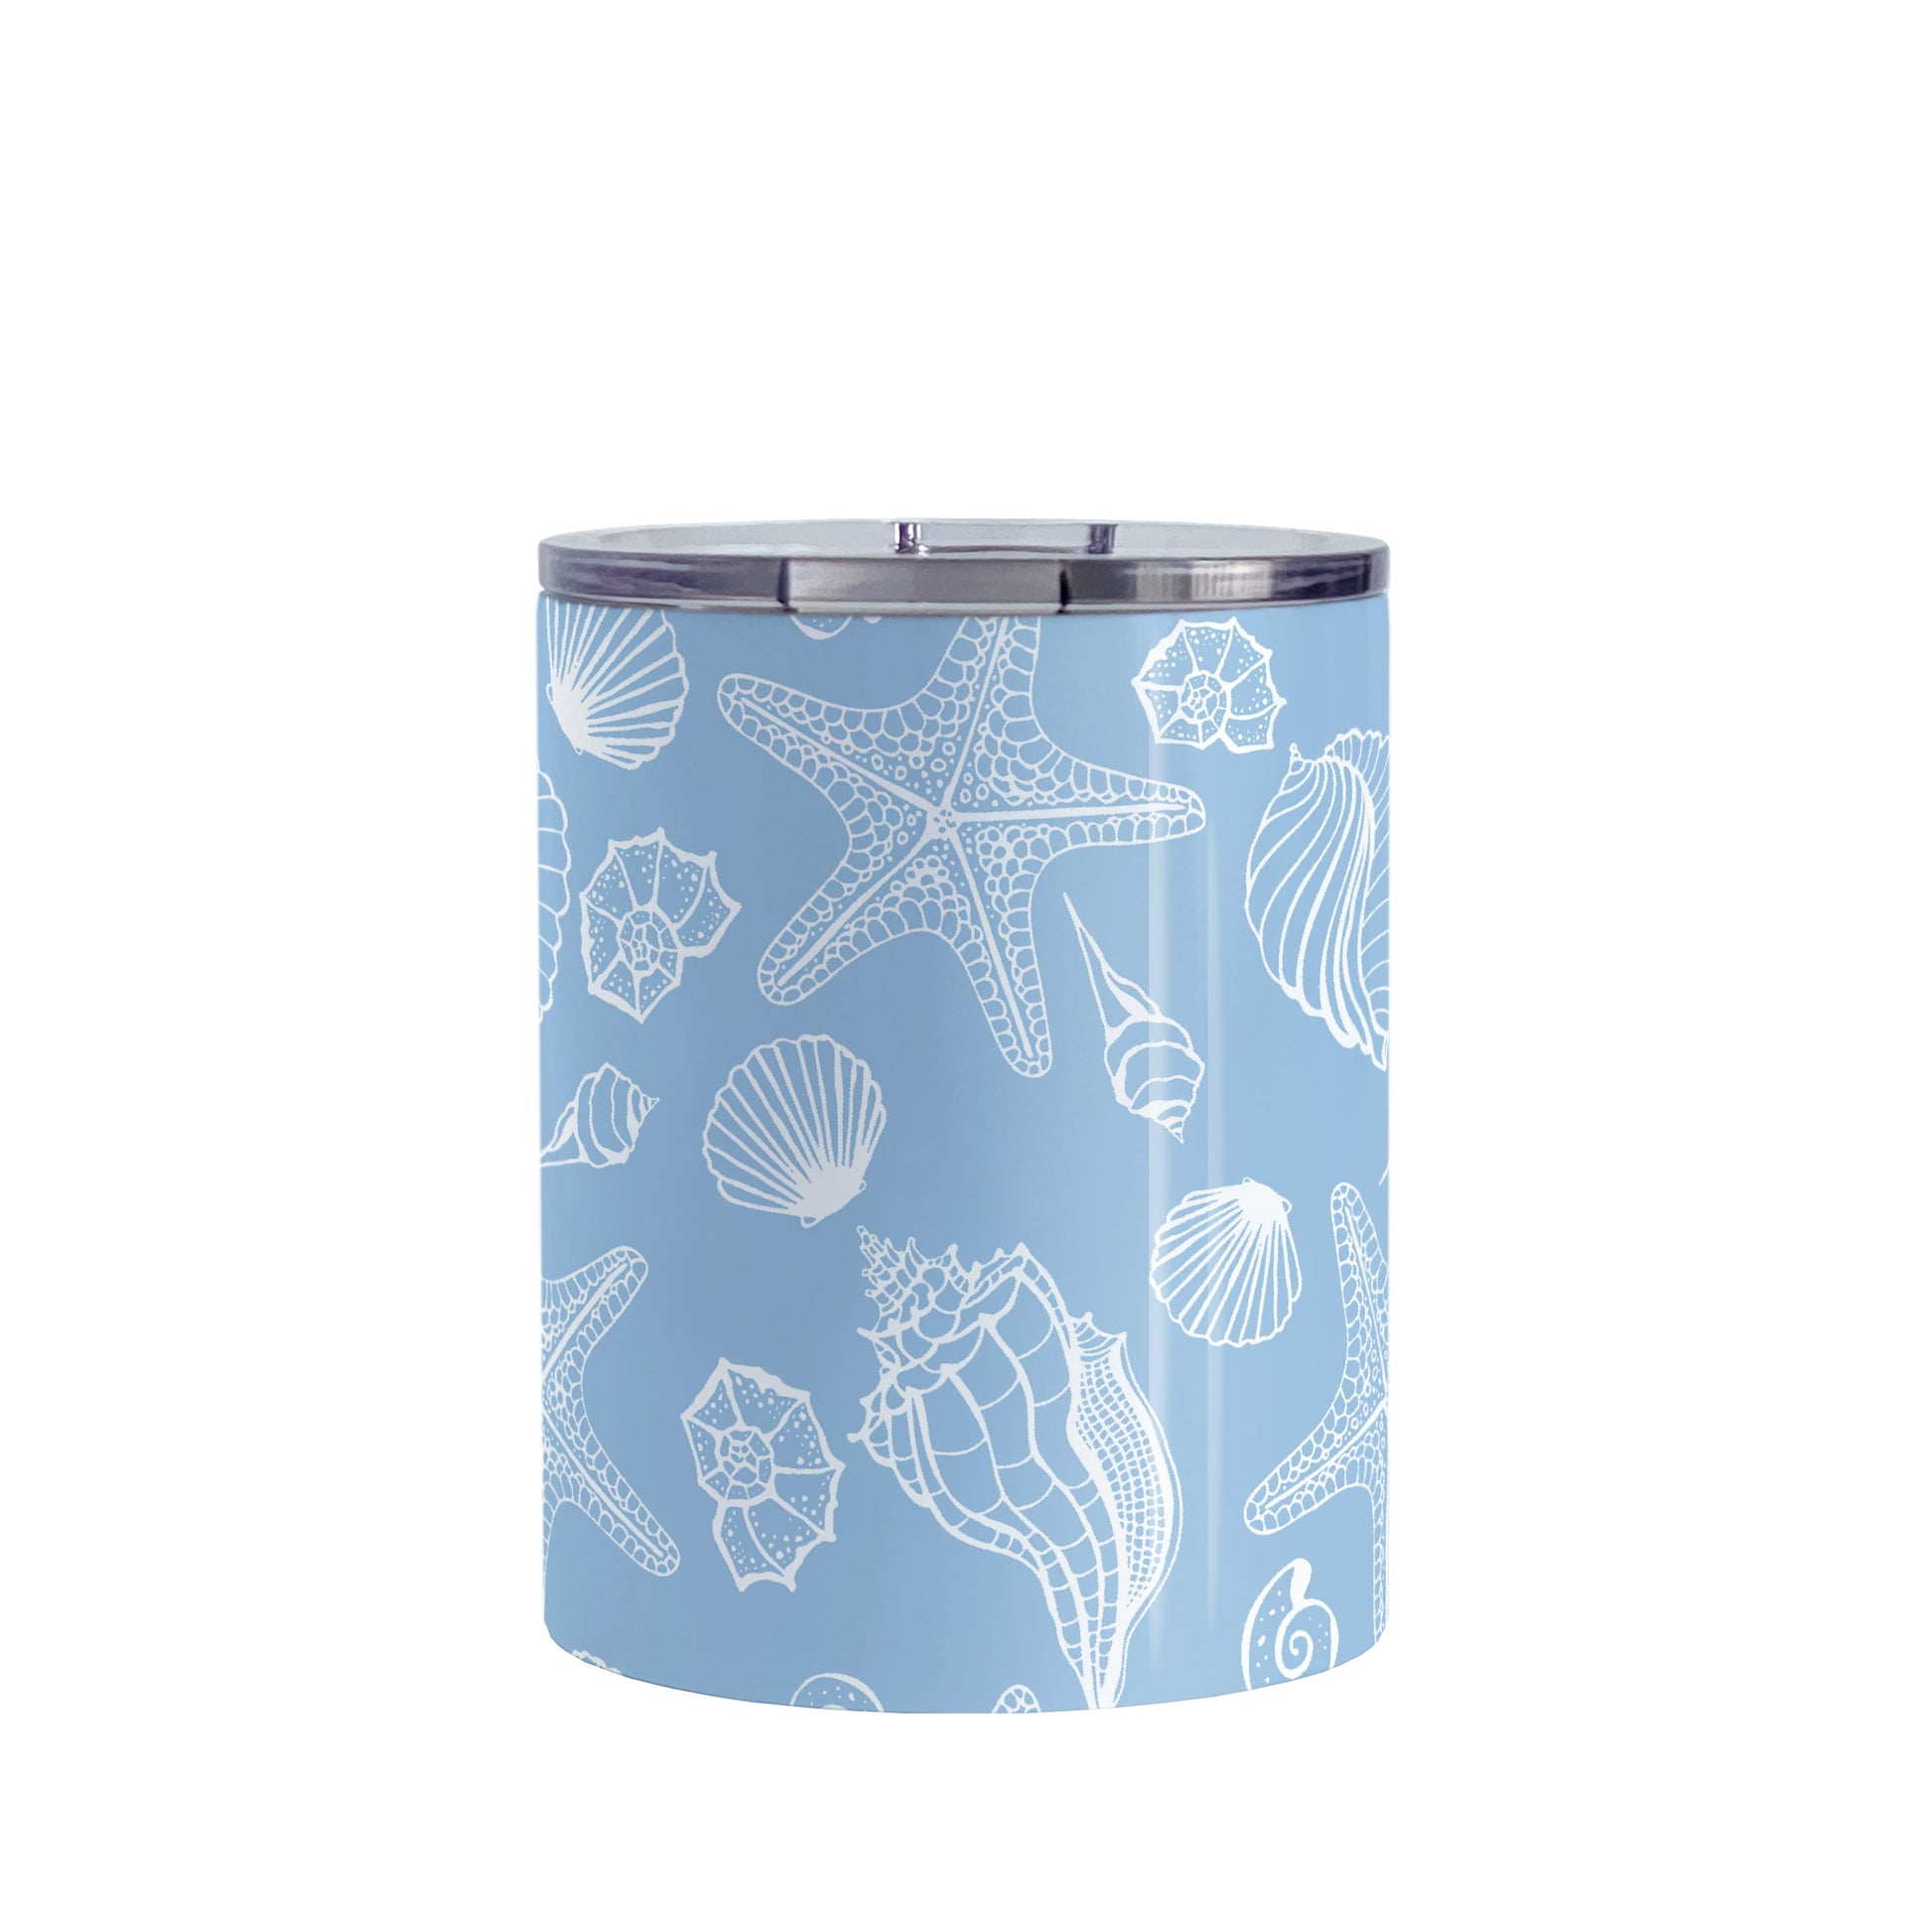 White Seashell Pattern Blue Beach Tumbler Cup (10oz, stainless steel insulated) at Amy's Coffee Mugs